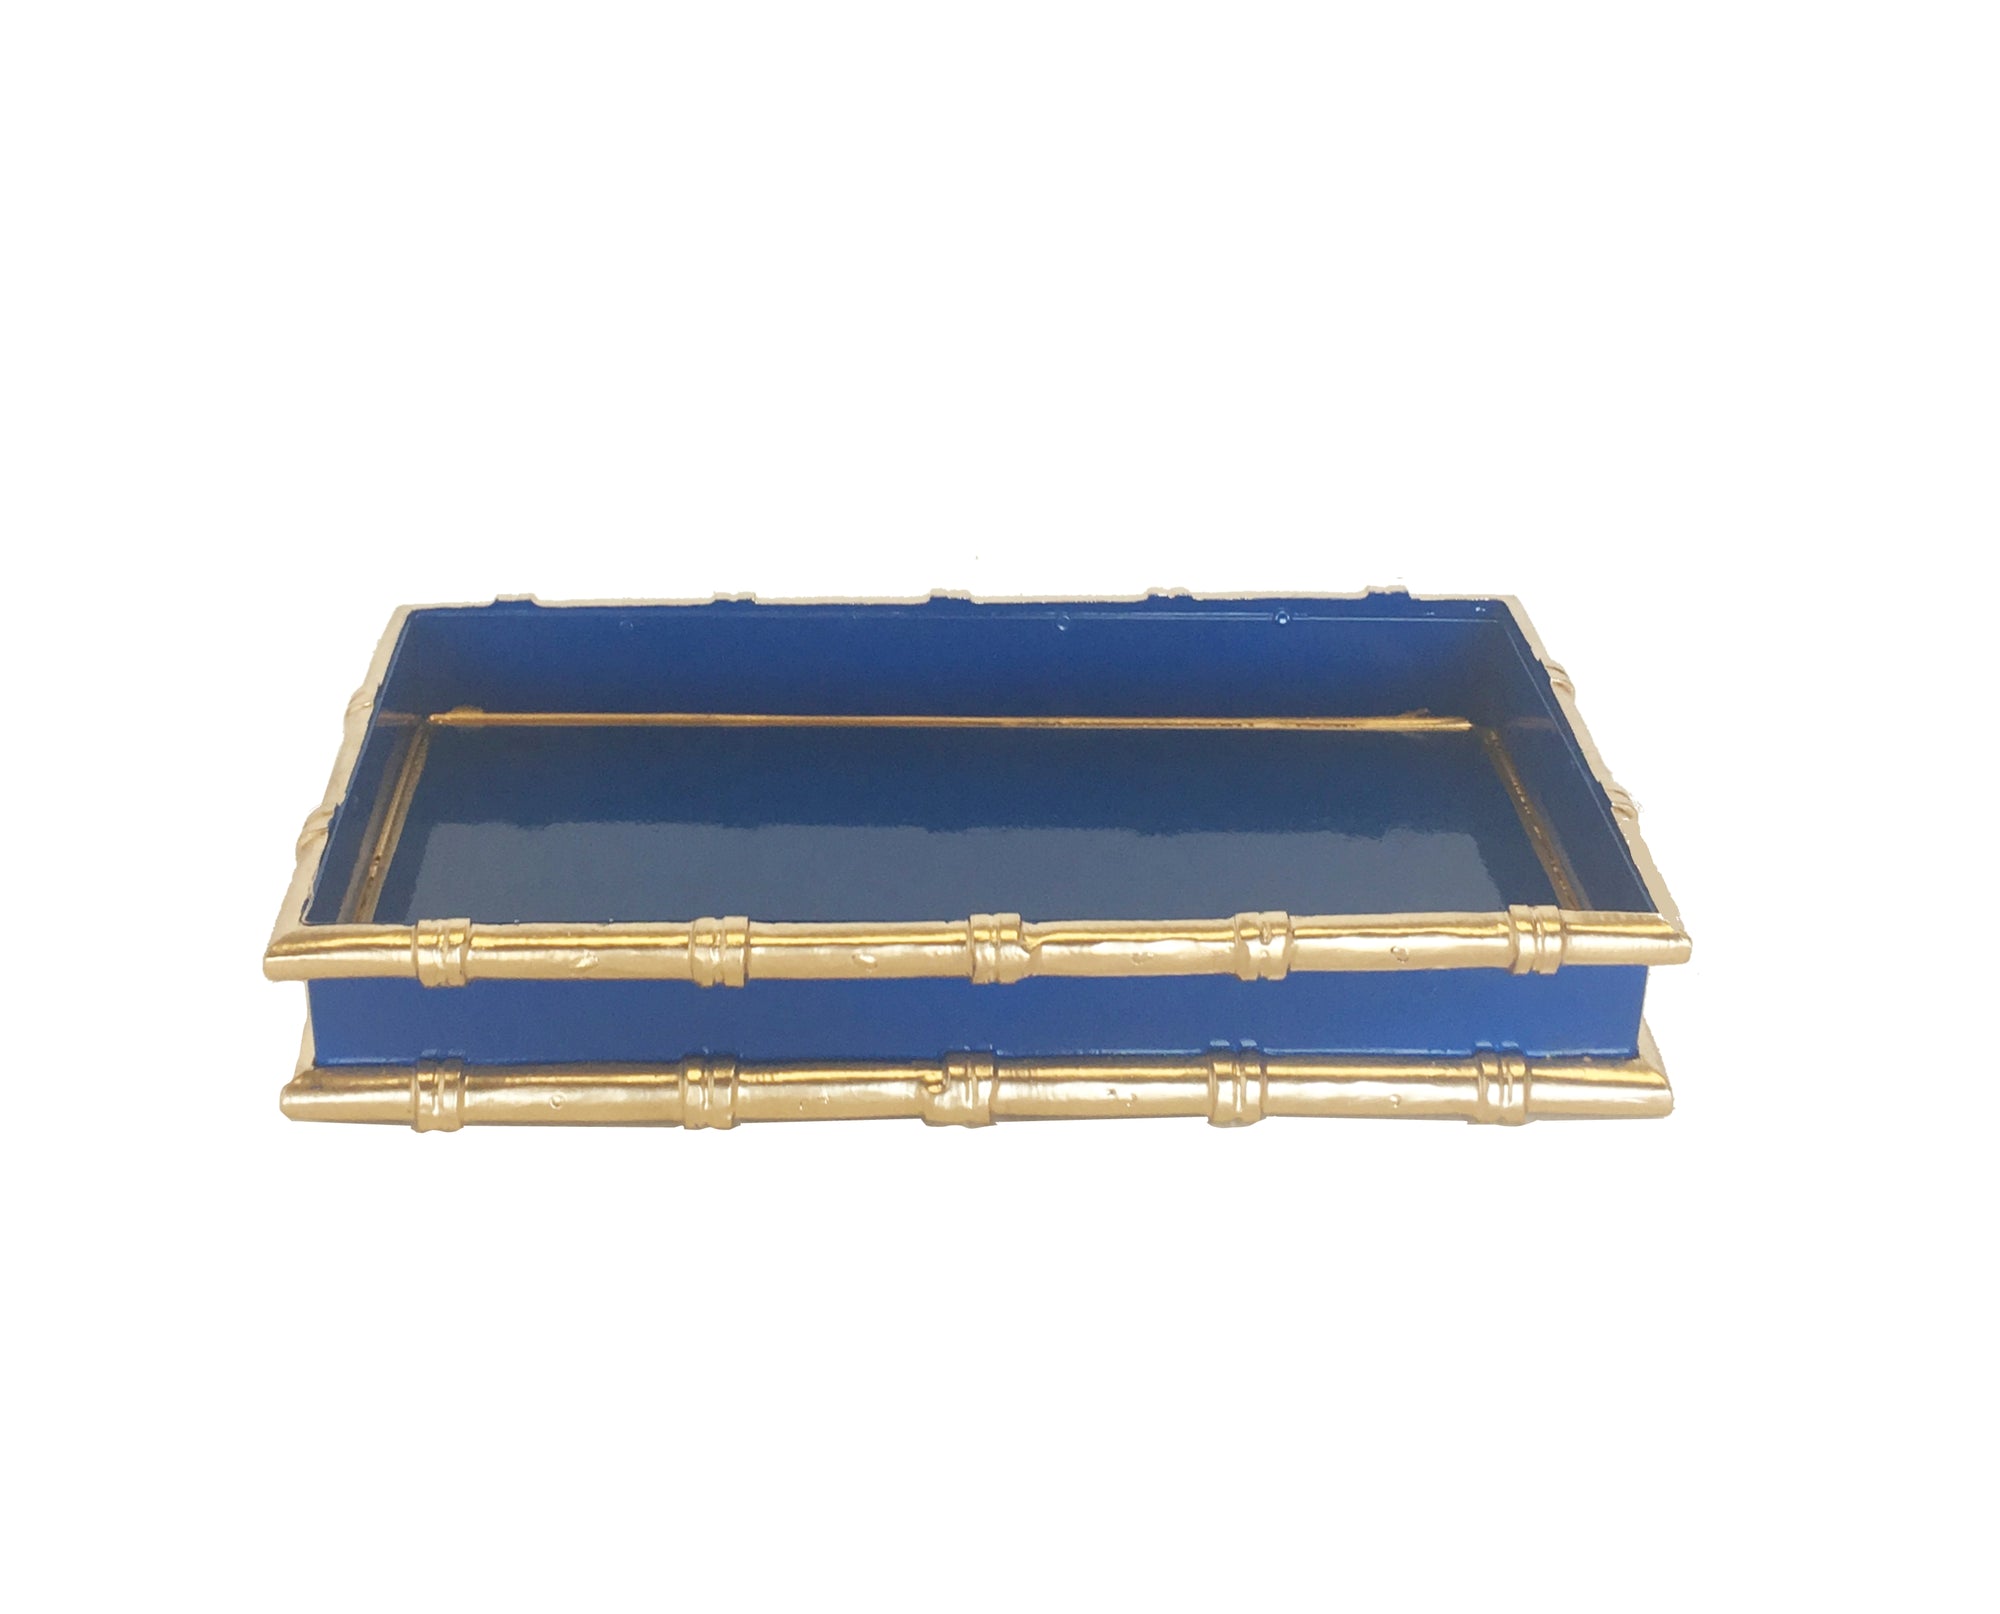 Dana Gibson Bamboo in Navy Letter Tray, 2ndQ